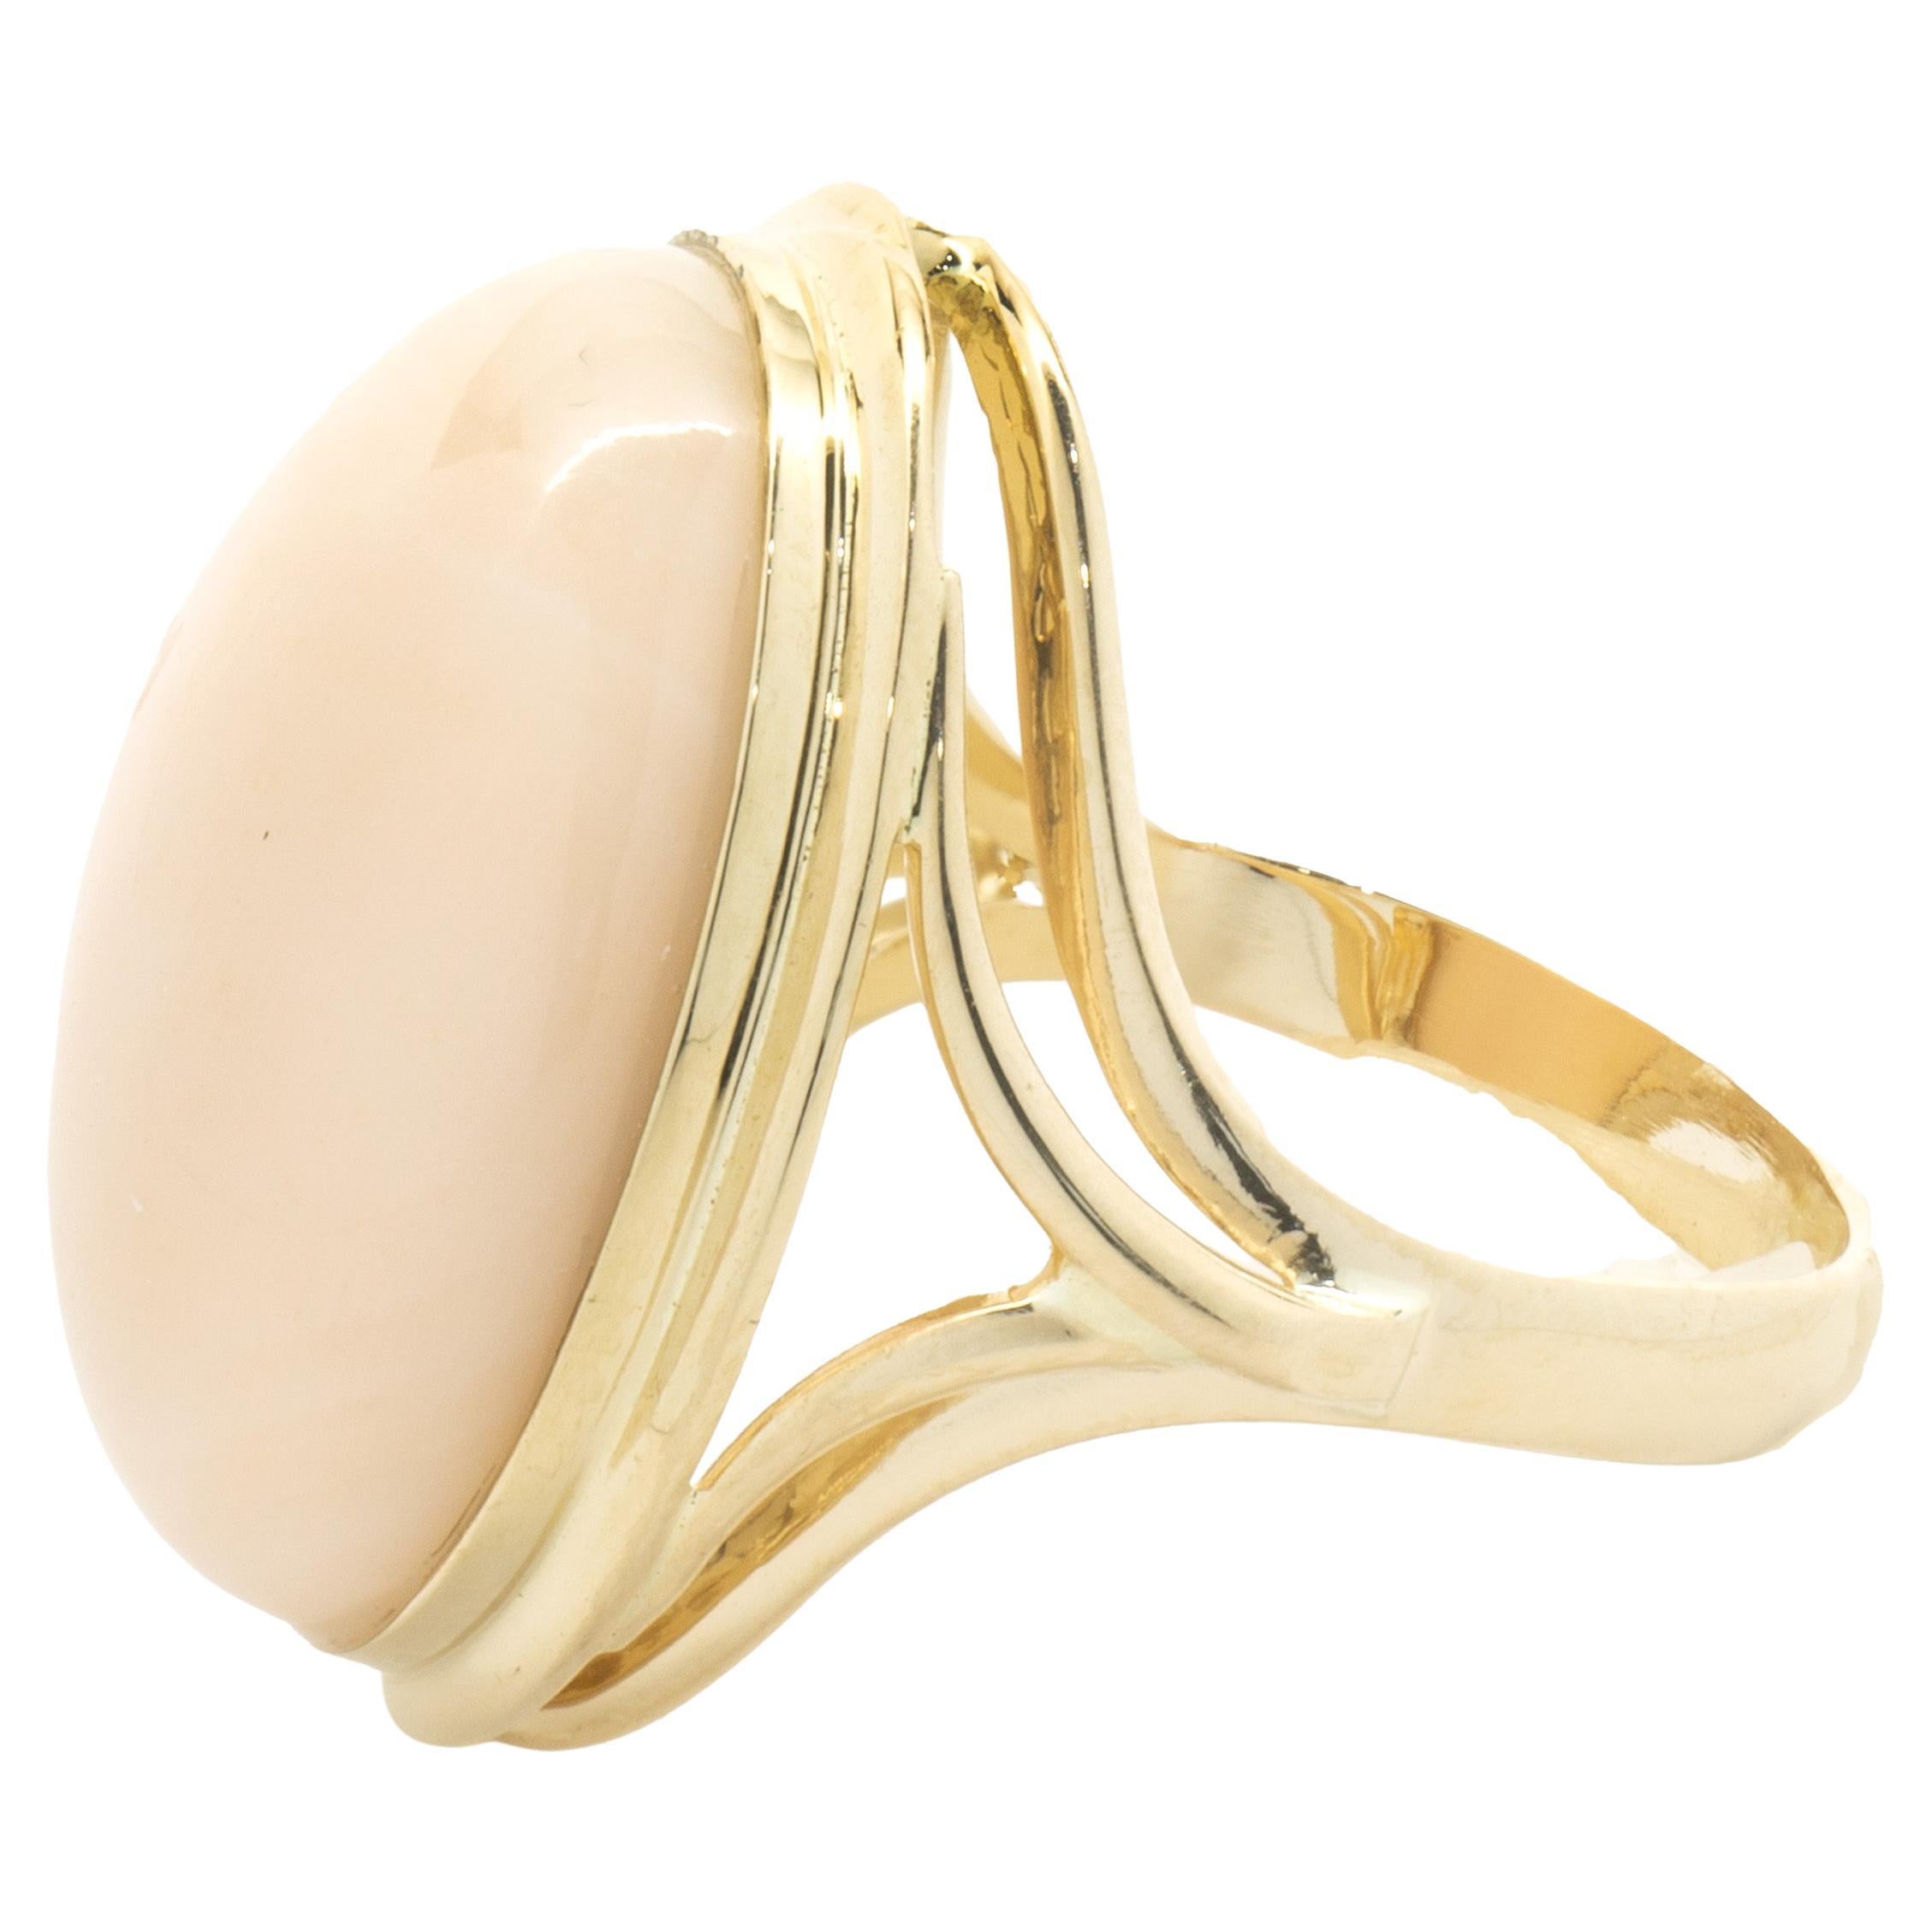 Designer: custom design
Material: 14K yellow gold
Dimensions: ring top measures 22.5mm wide
Ring Size: 5.5 (please allow two extra shipping days for sizing requests) 
Weight: 6.72 grams
